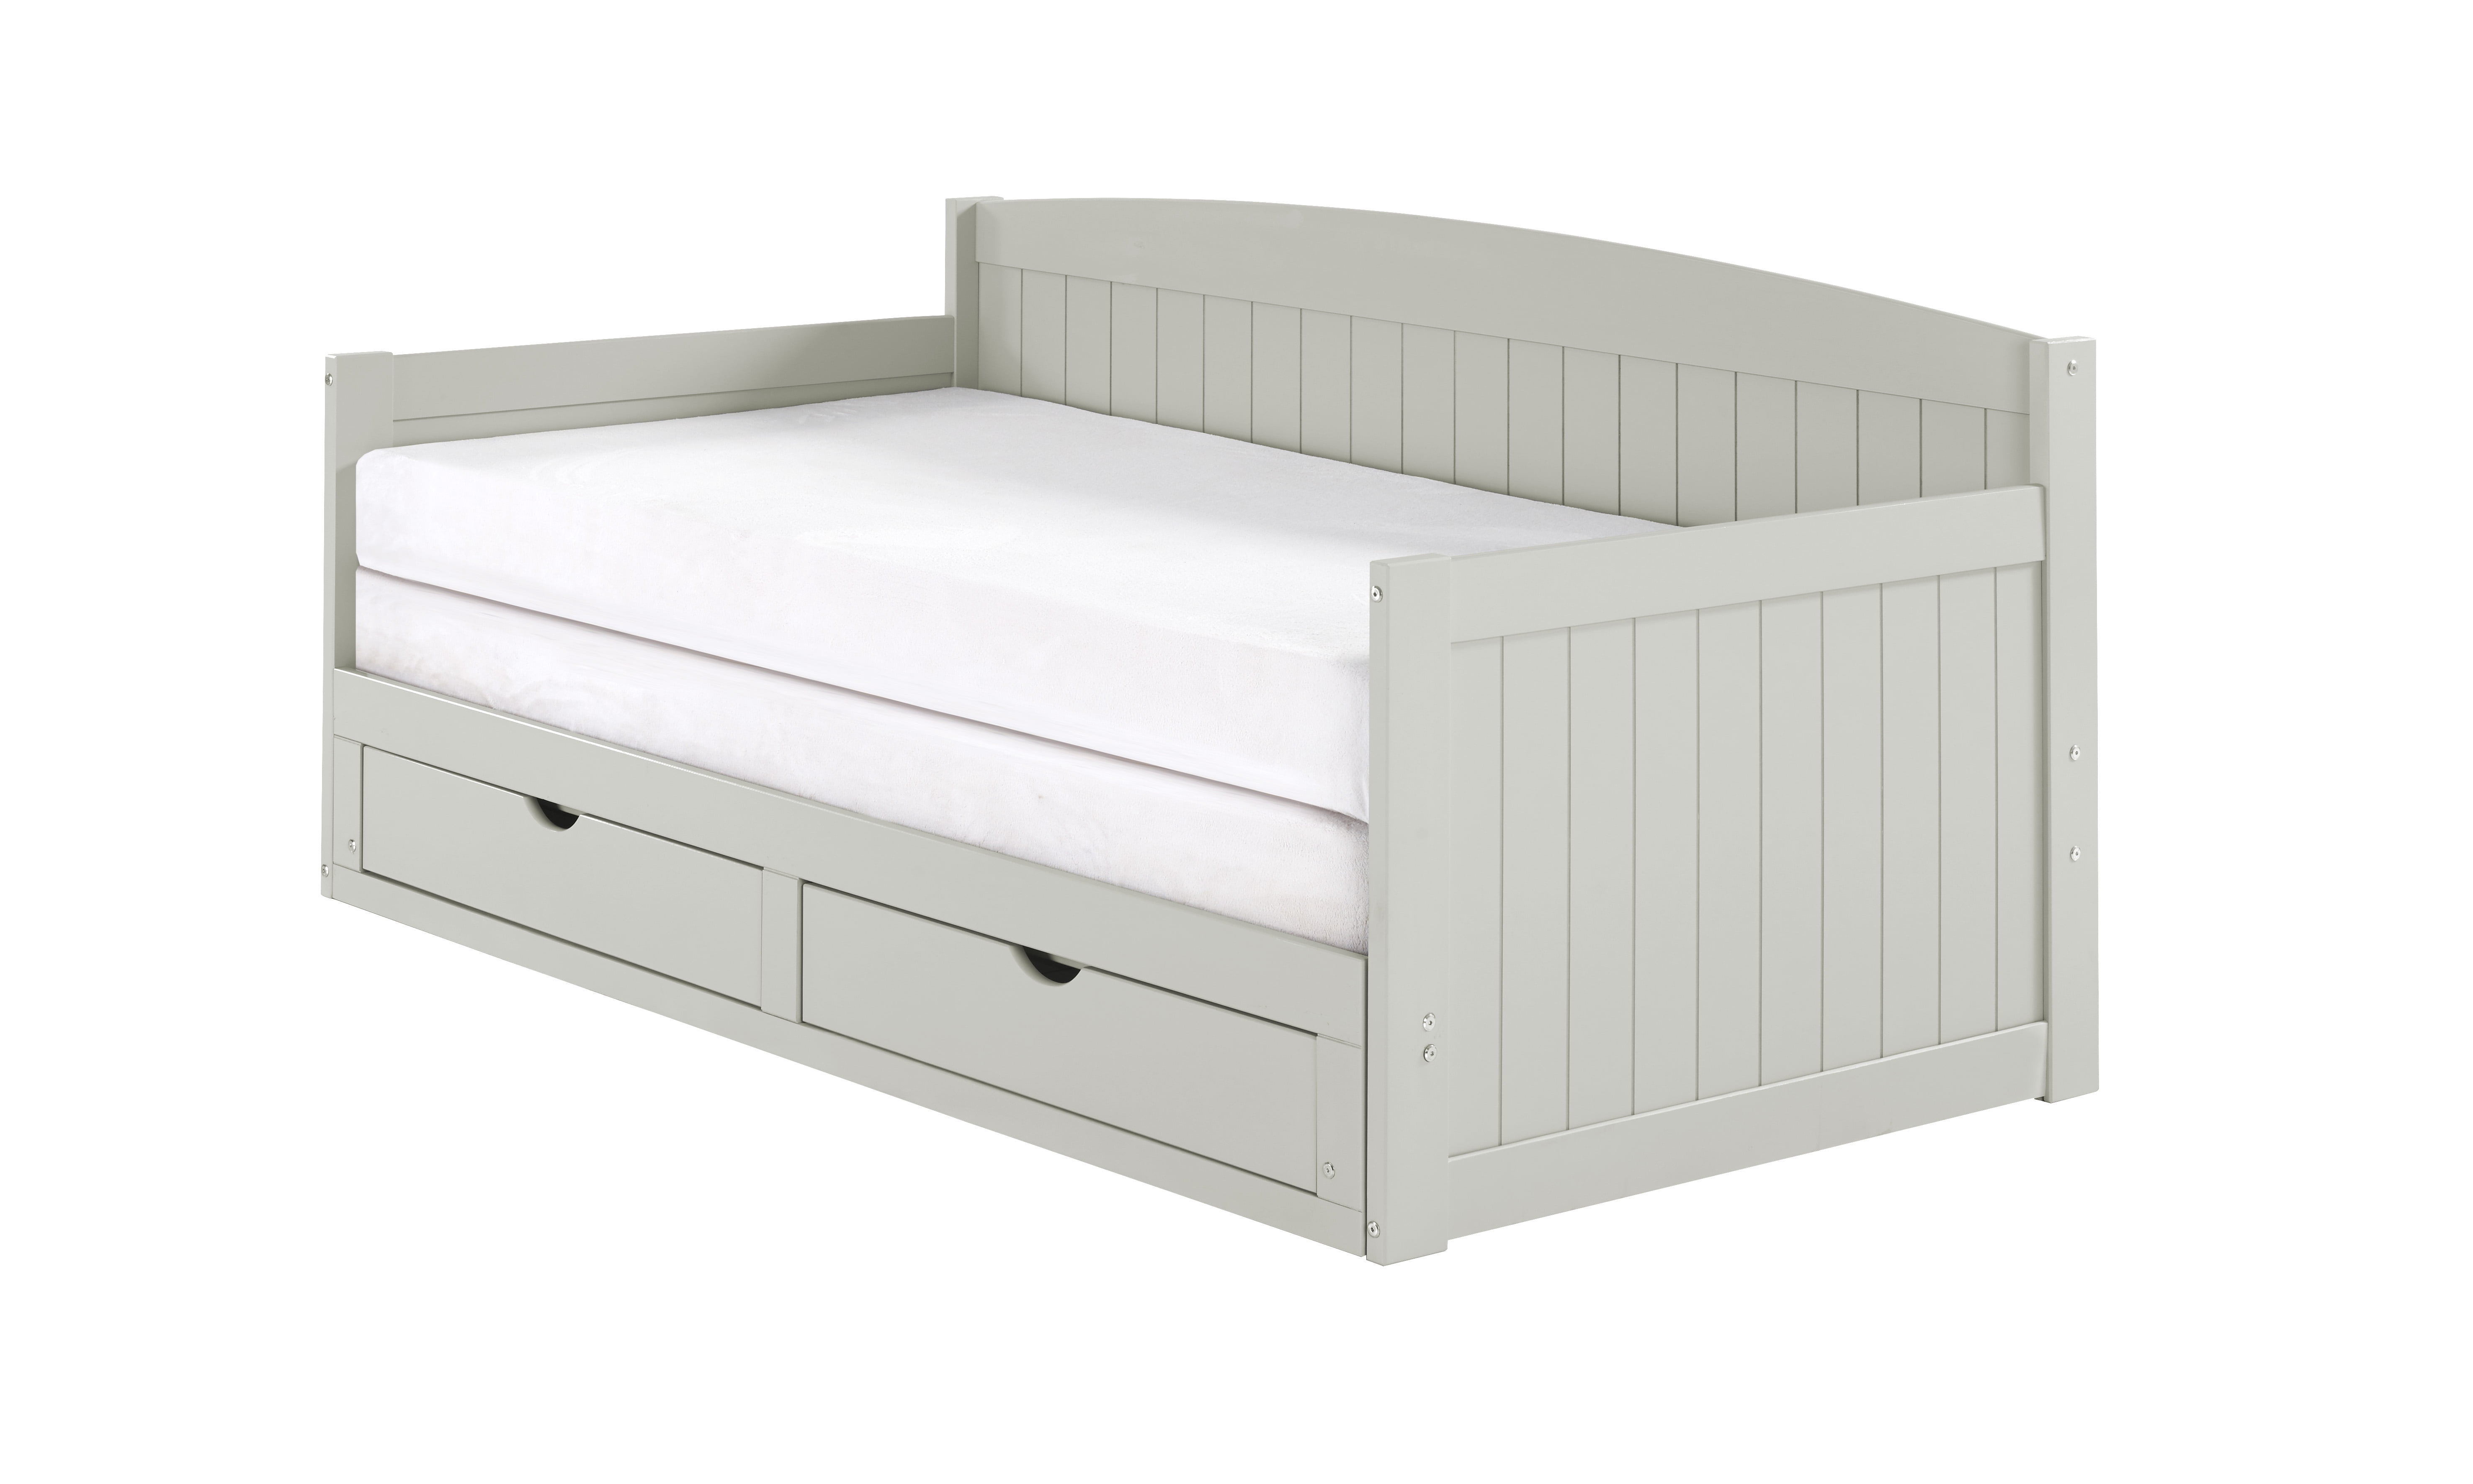 Harmony Daybed With King Conversion, Trundle Bed That Converts To King